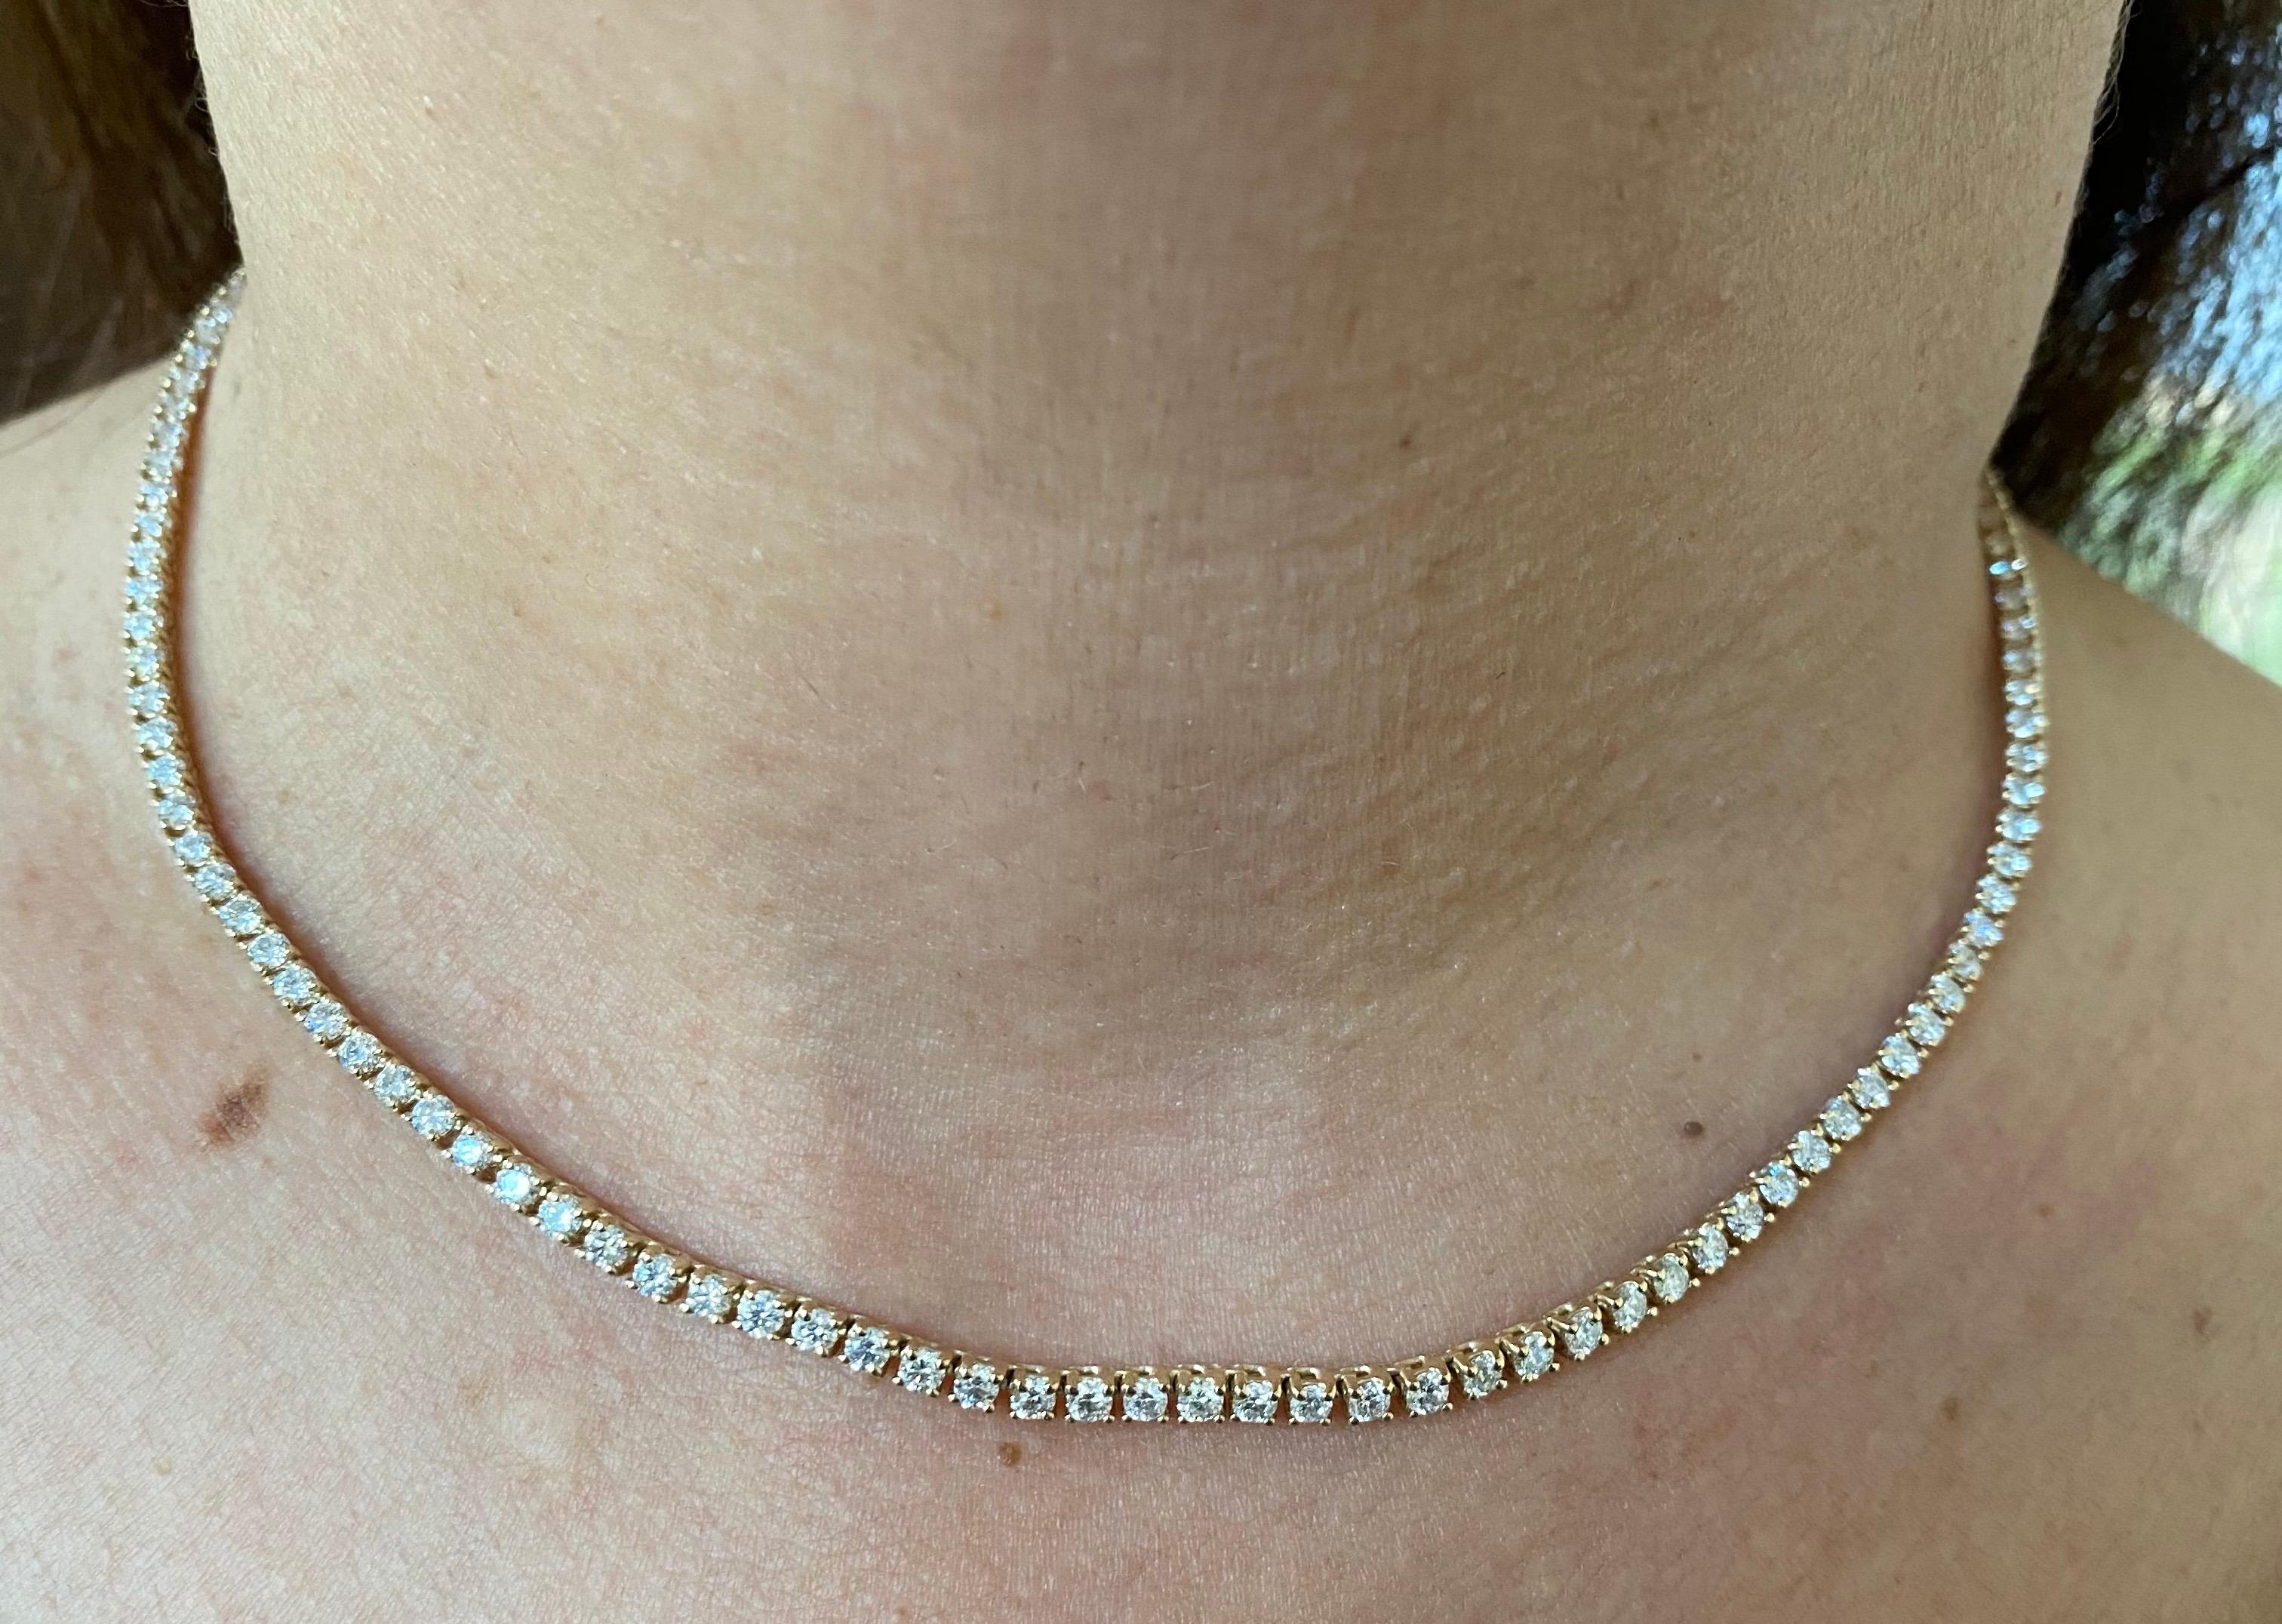 4 Prong tennis necklace set in 14K yellow gold. The necklace is set with 0.04 carat stones, the total weight is 5.85 carats. The color of the stones are G, the clarity is SI1-SI2. The necklace is 16 inches.